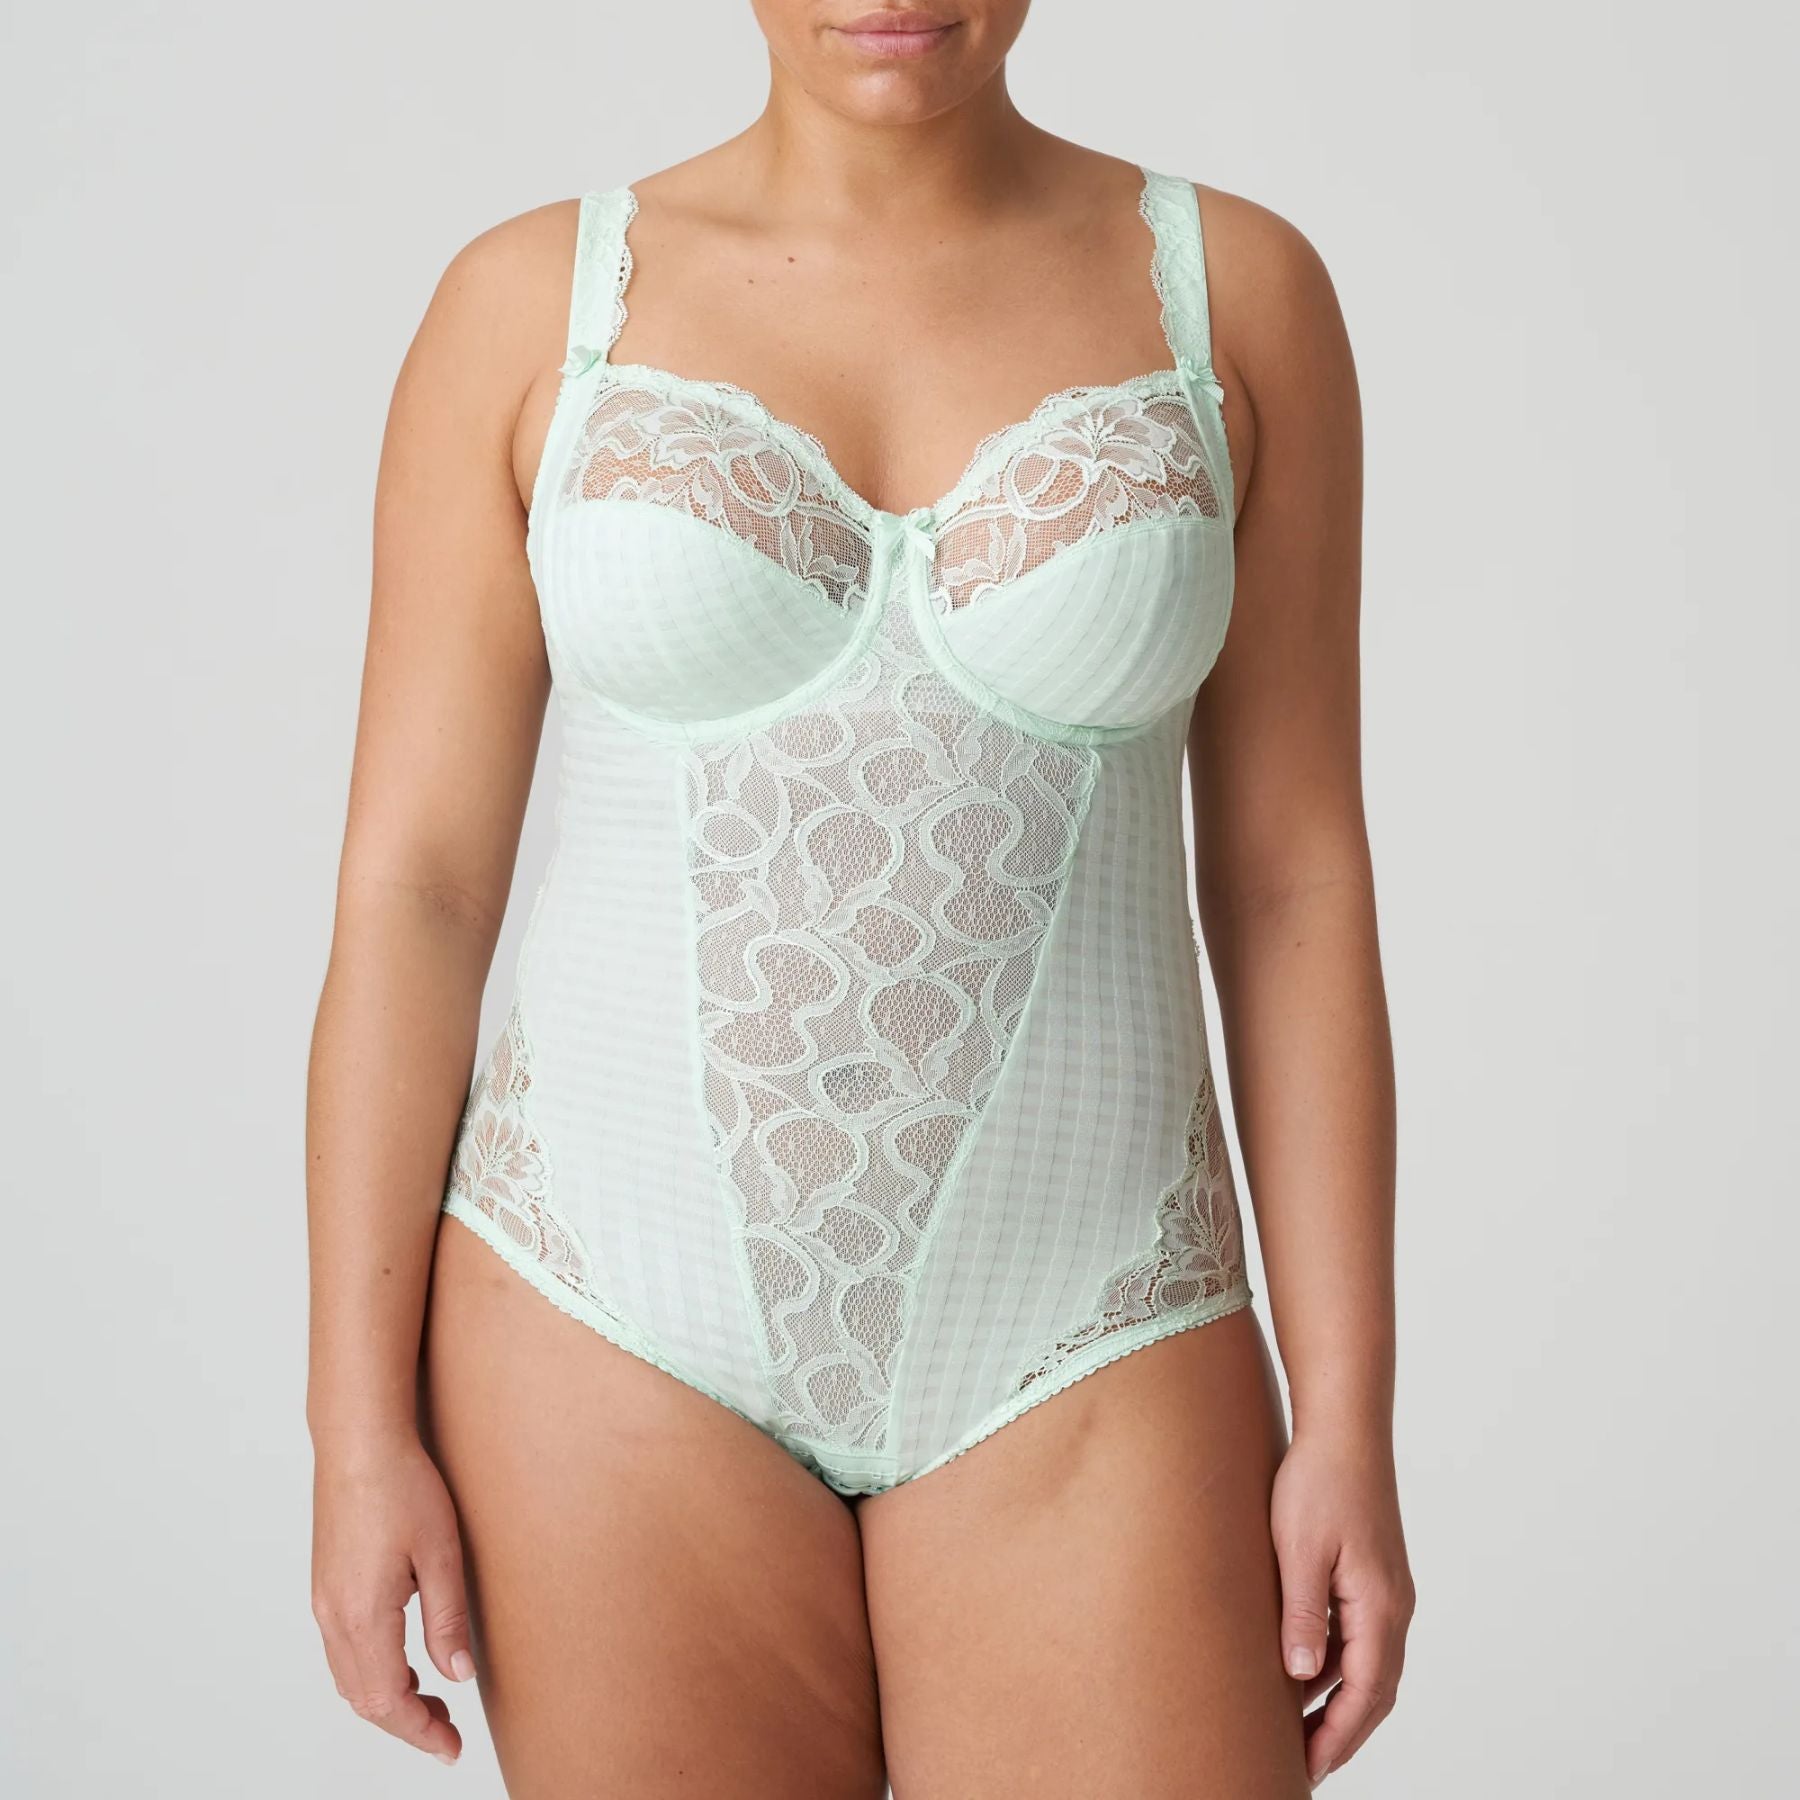 Anne Corded Lace Bodysuit – Who Cares? Wear